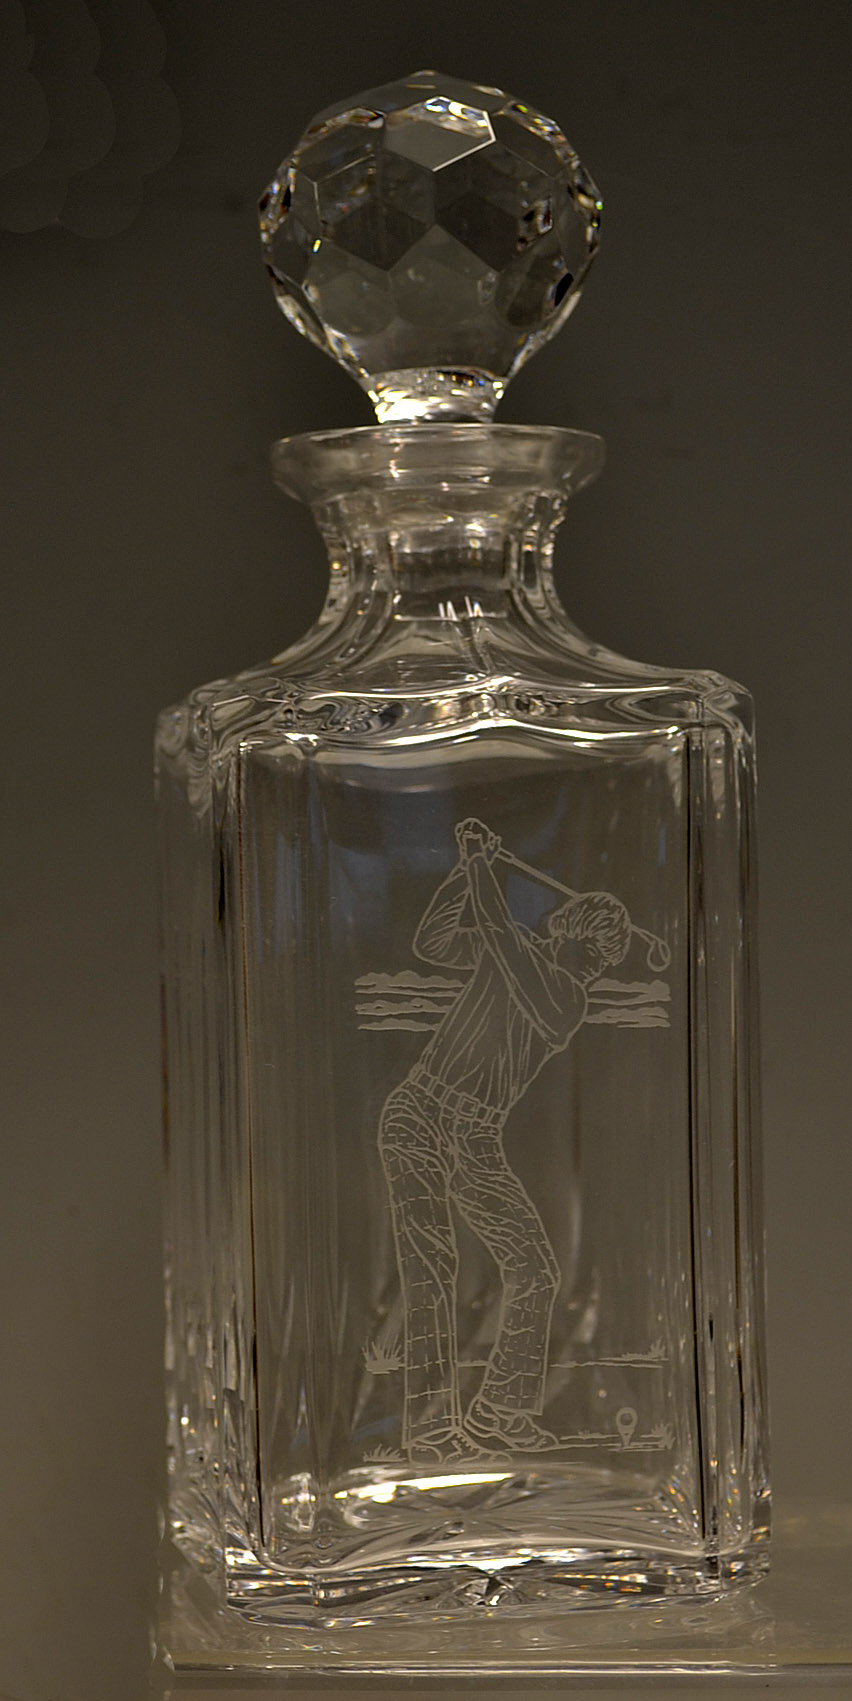 Edinburgh Crystal Cut Glass Whiskey Decanter - with etched Golfer (in the style of Faldo) to one